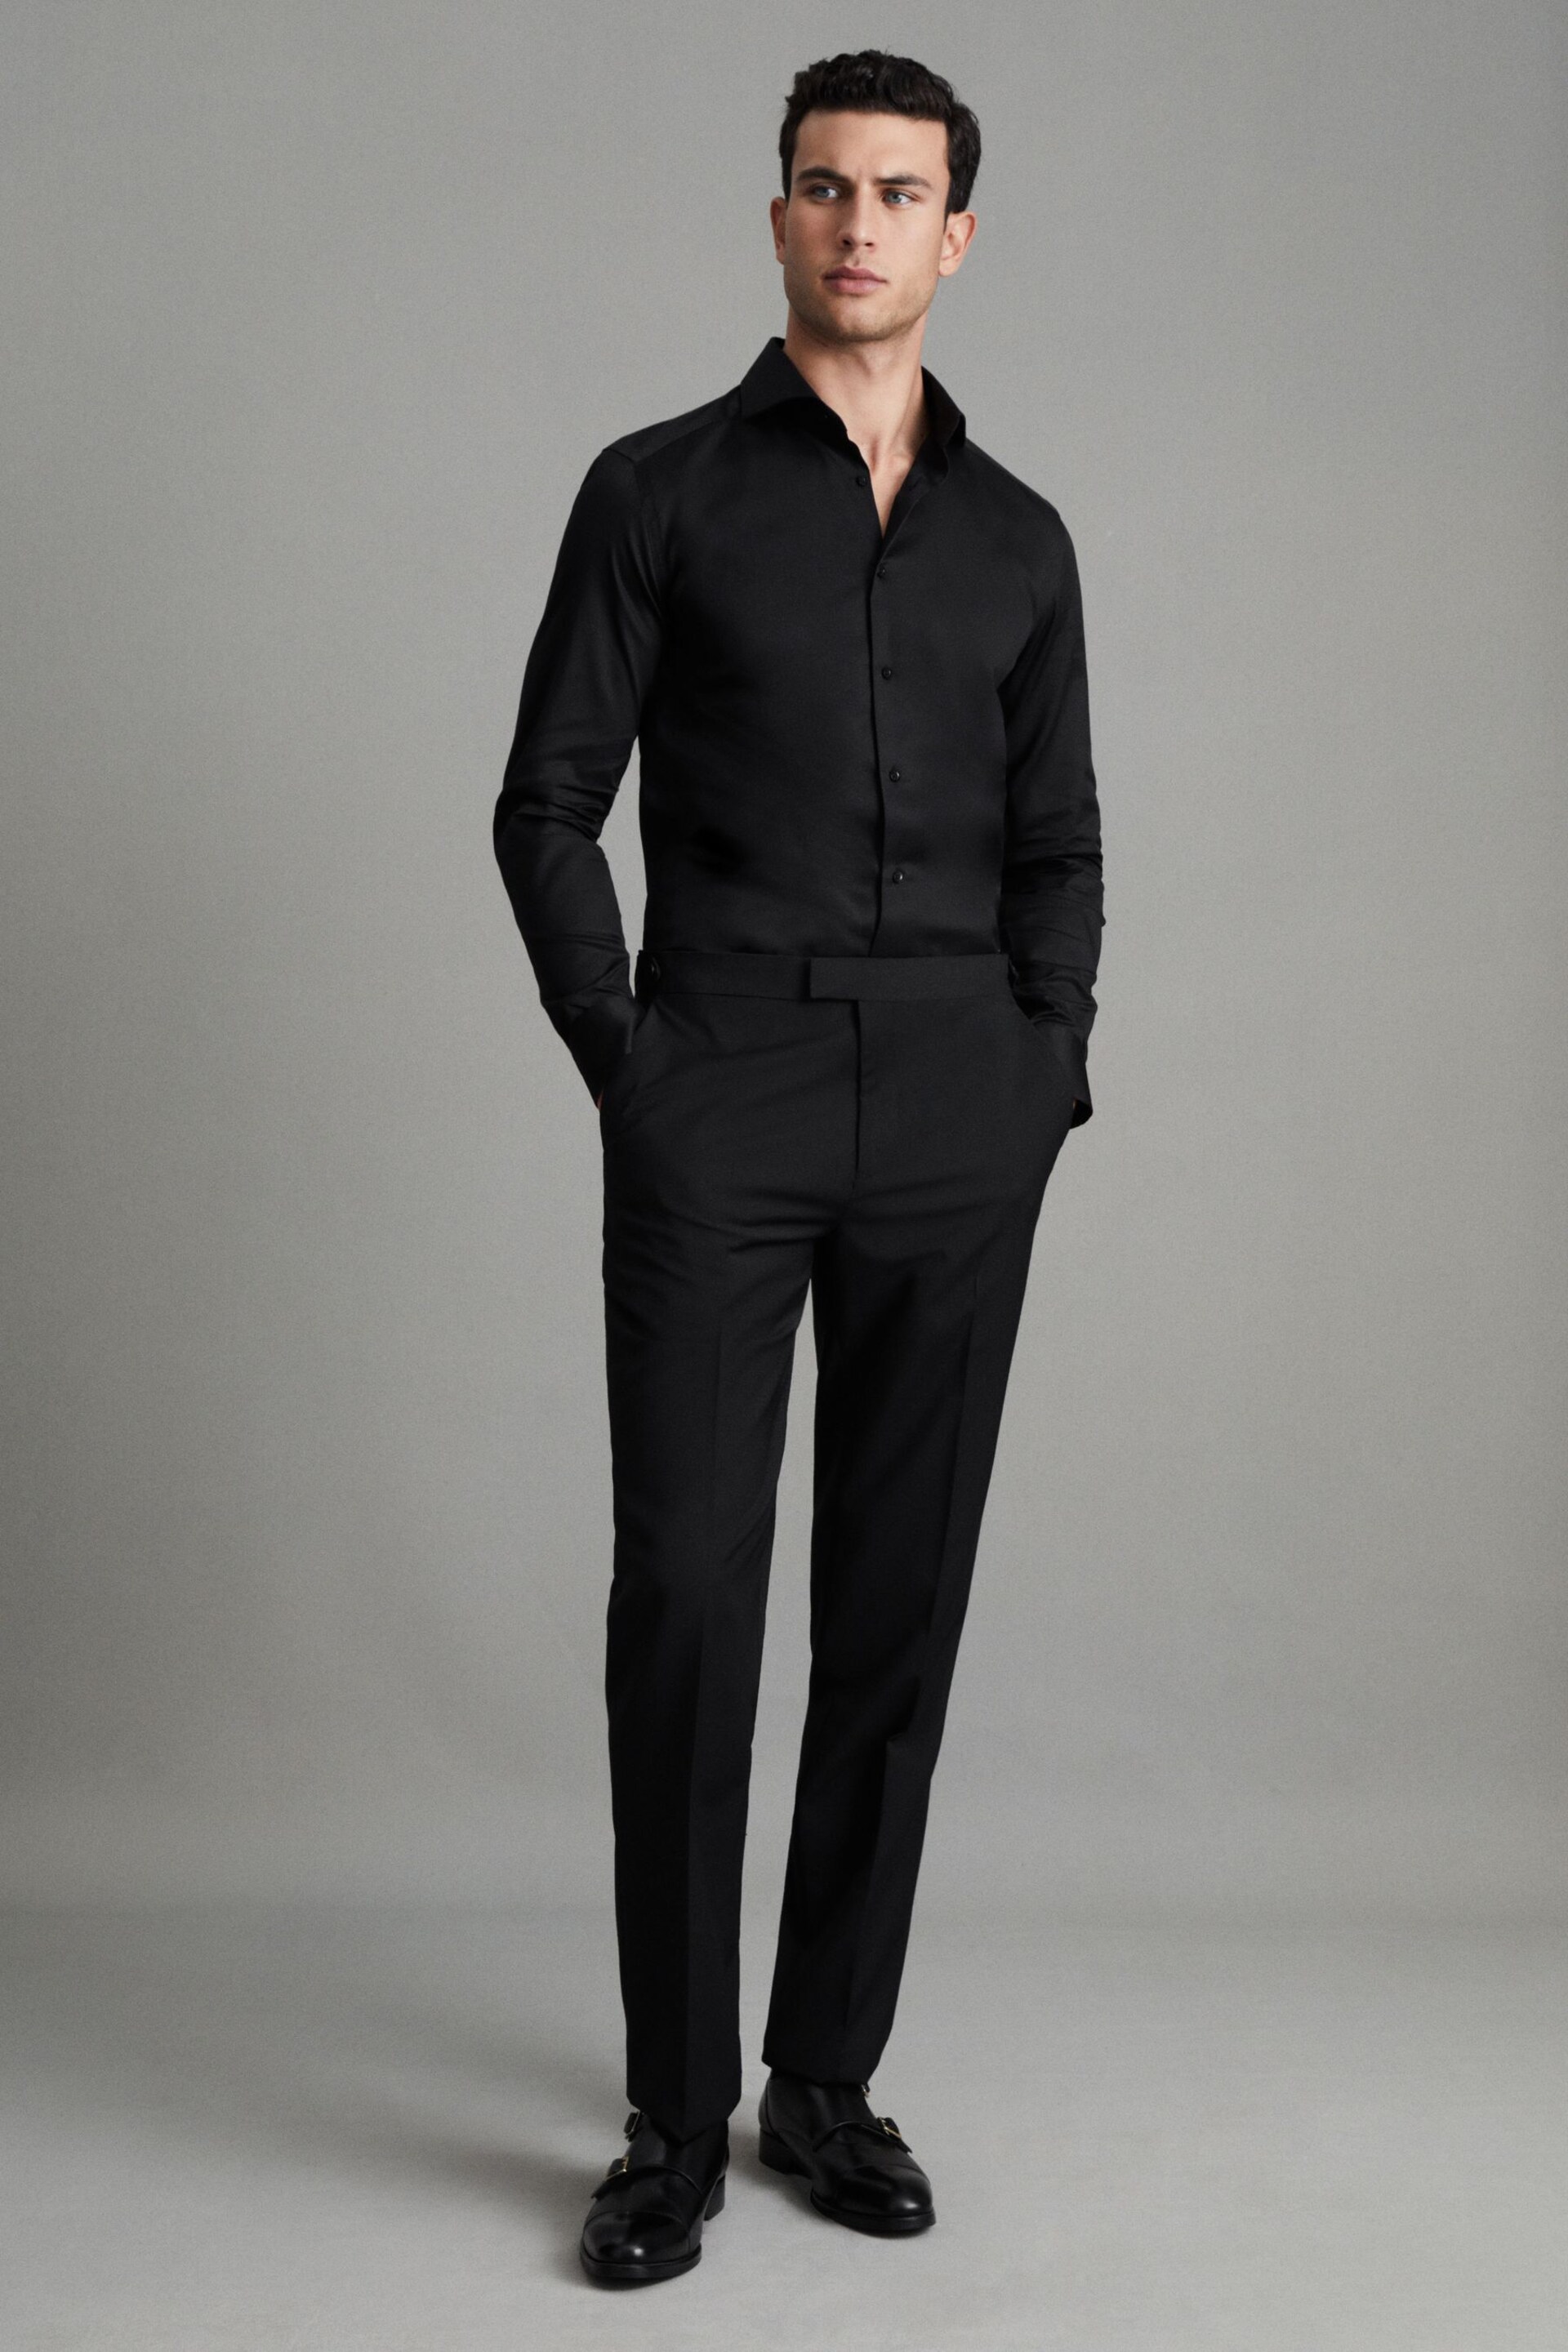 Reiss Black Storm Slim Fit Two-Fold Cotton Shirt - Image 3 of 6